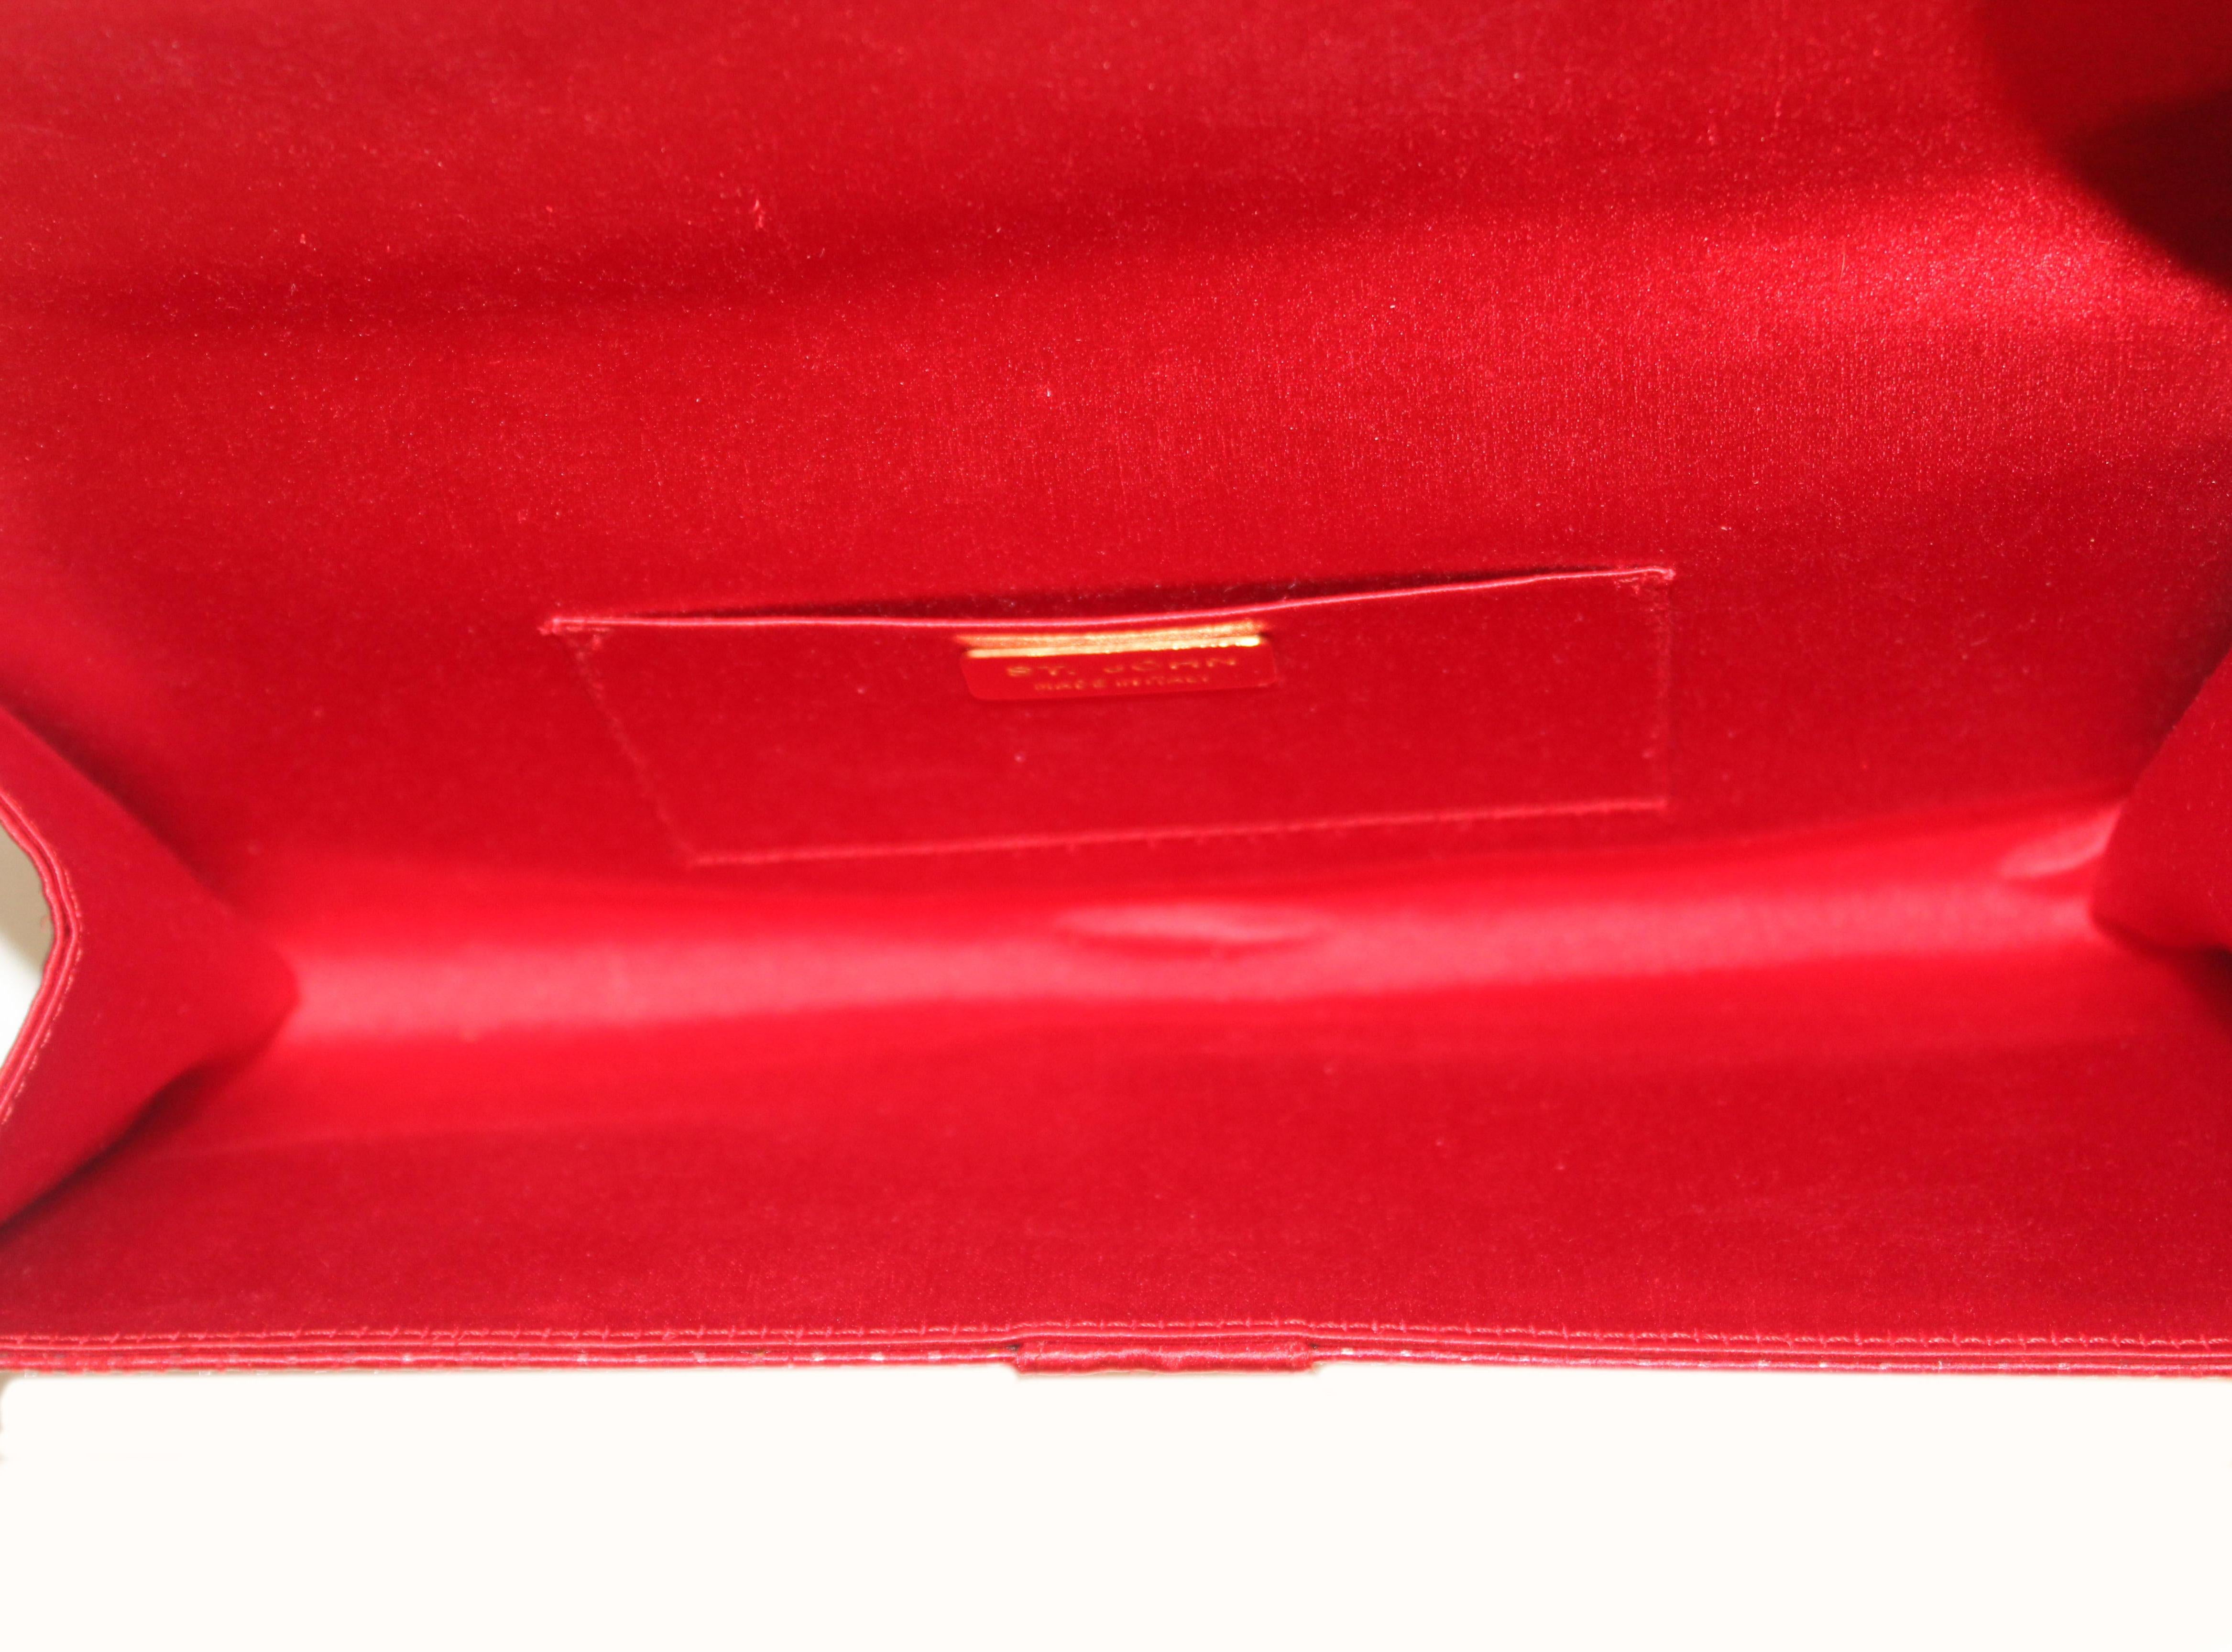 St John Red Sequined Satin Clutch W/ Crystal Buckle At Closure 2